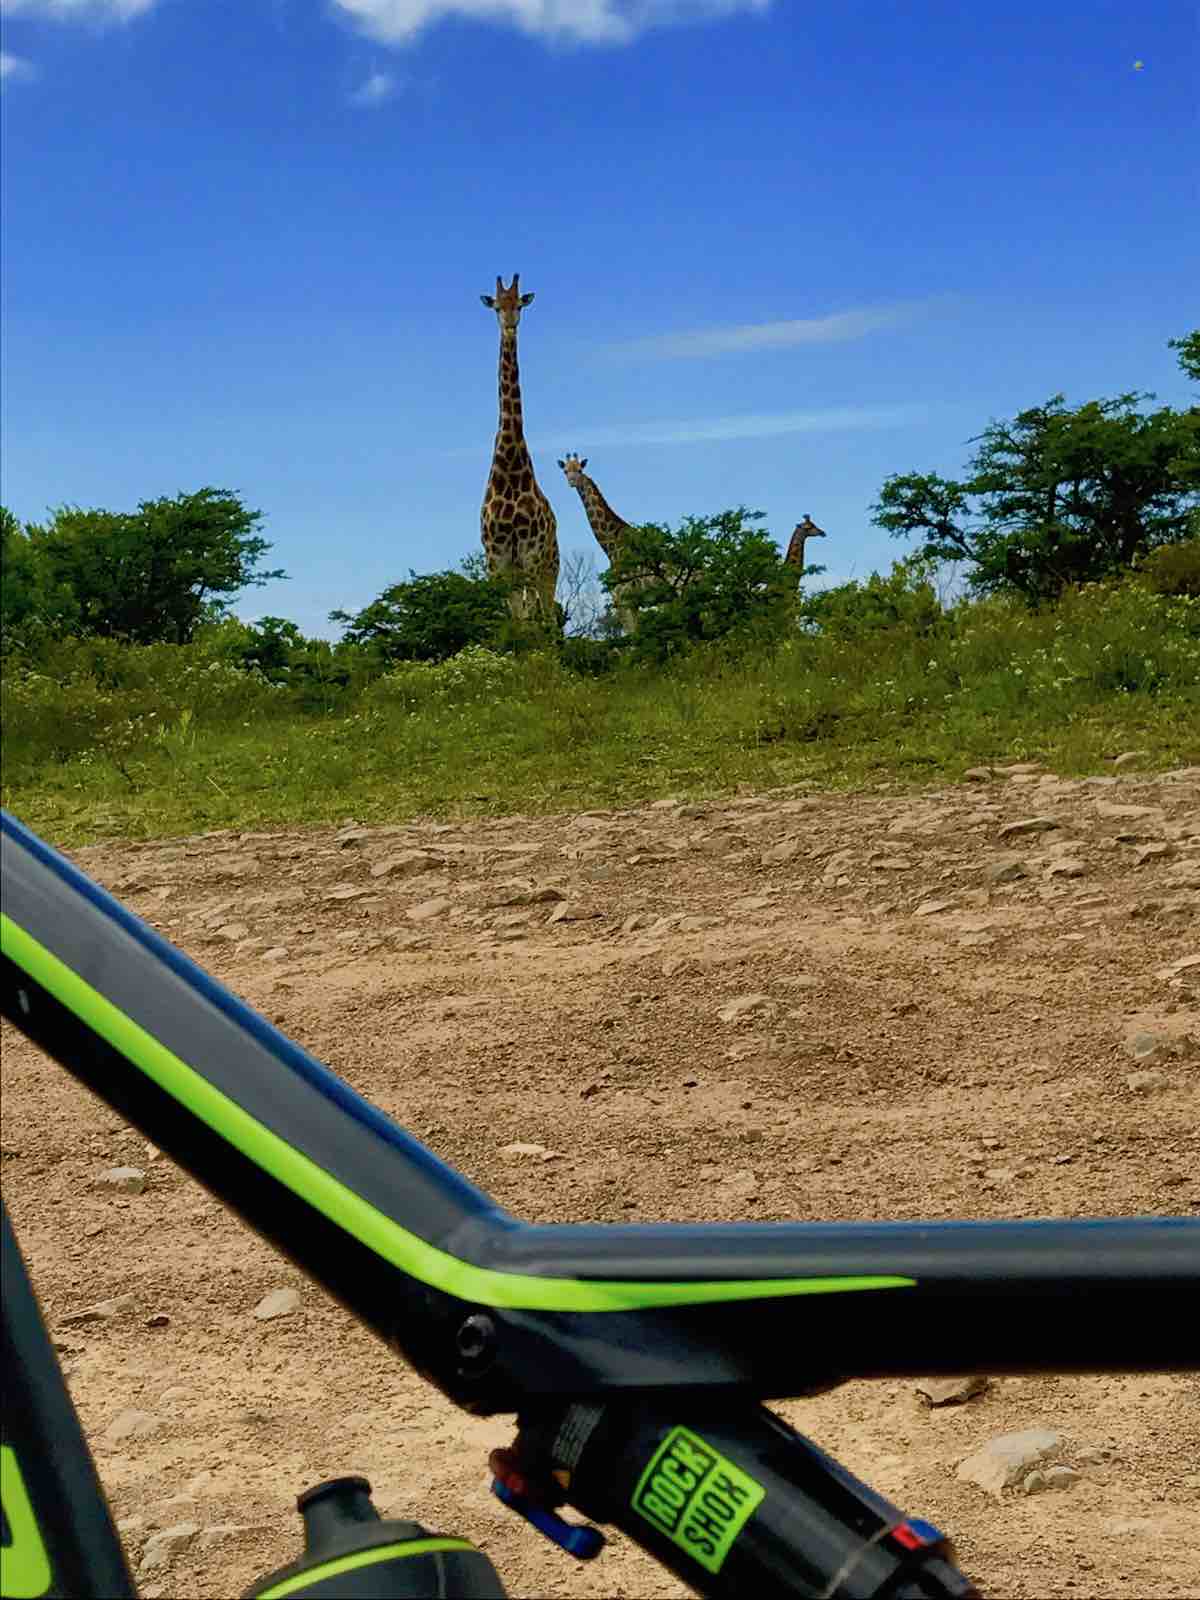 bikerumor pic of the day Eastern Cape province of South Africa. Cycling amidst giraffe.